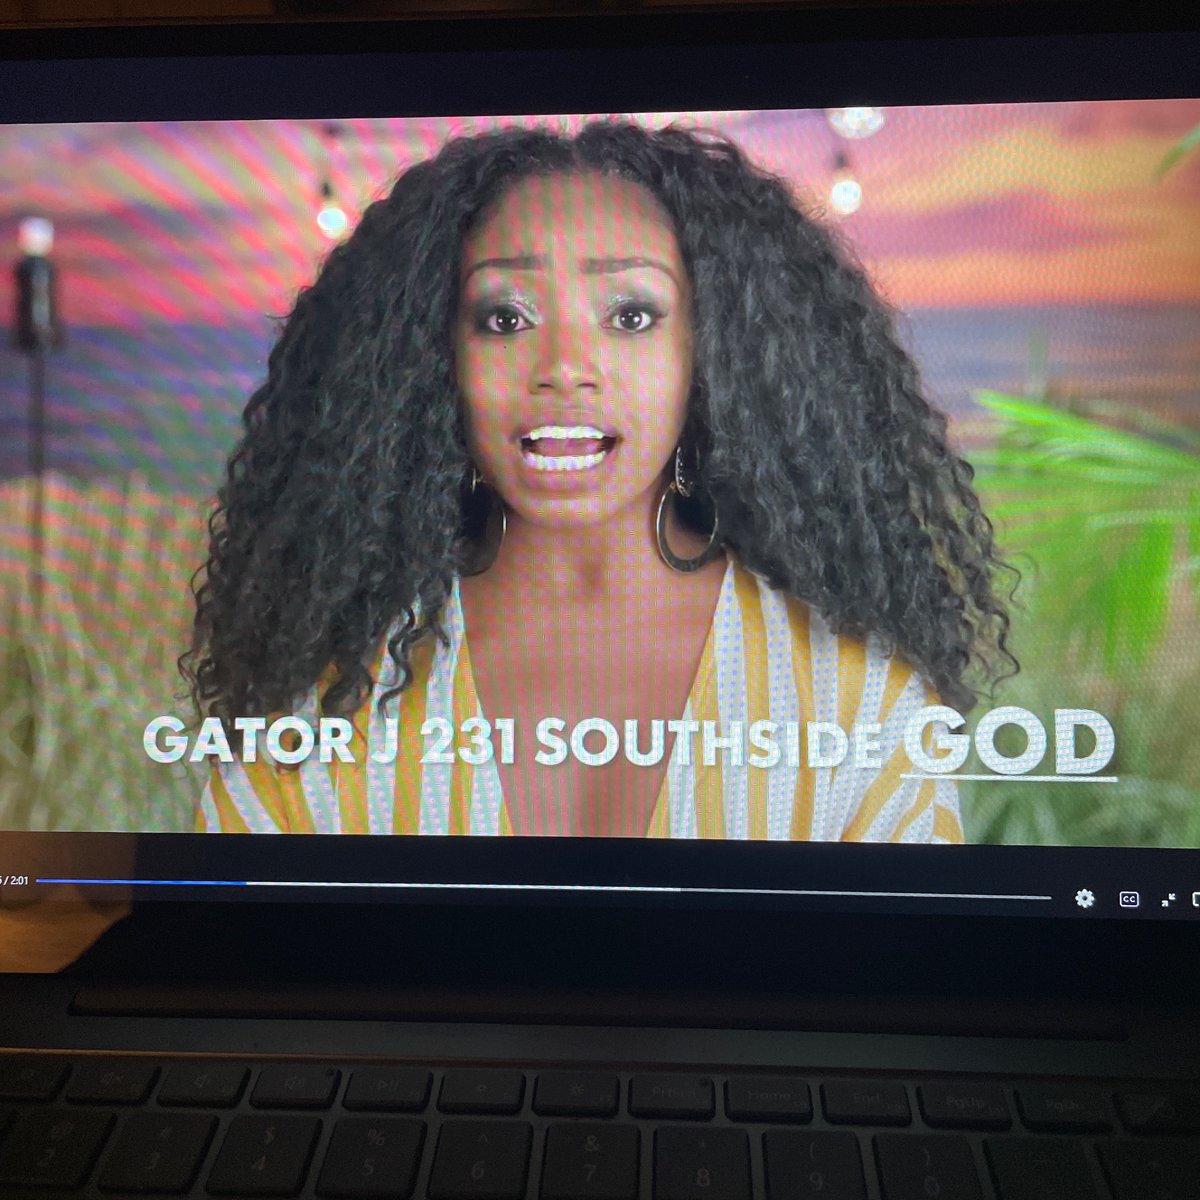 i will never forget floribama shore when candace started dating a guy who calls himself gatorj231 south side god….